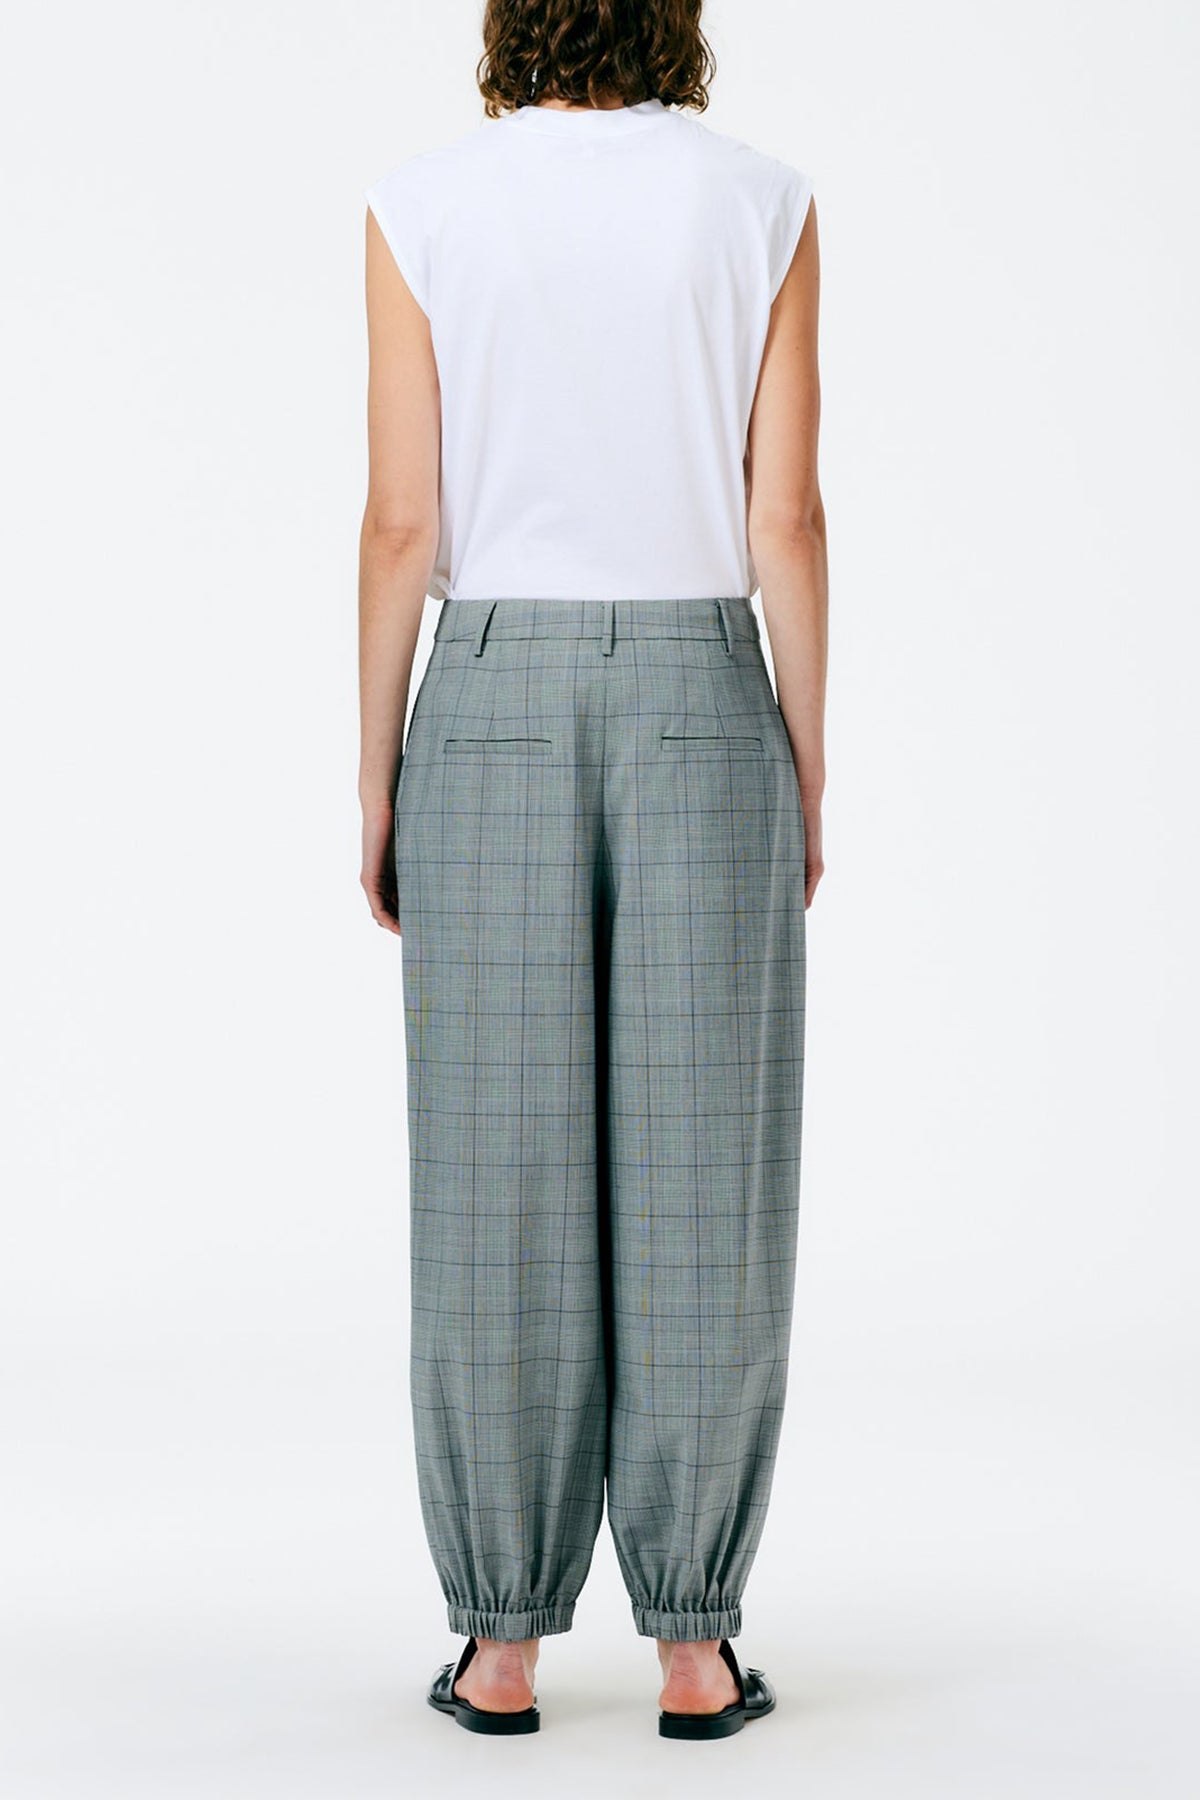 Menswear Suiting Pleated Balloon Pant in White/Black Multi - shop-olivia.com